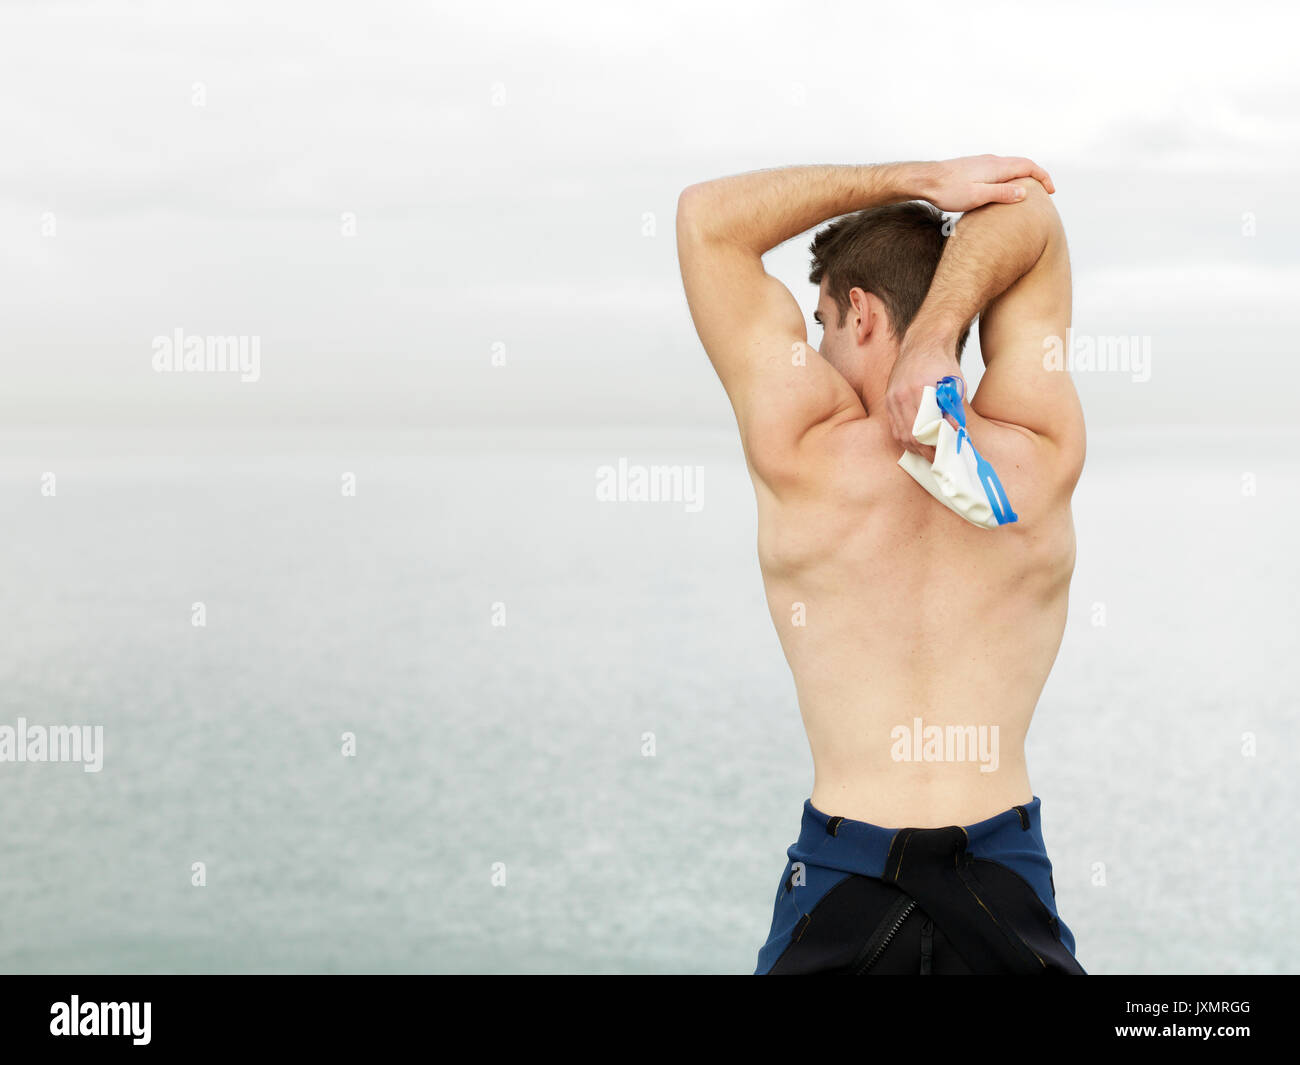 Rear view of bare chested man warming up, stretching arms, Melbourne, Victoria, Australia, Oceania Stock Photo